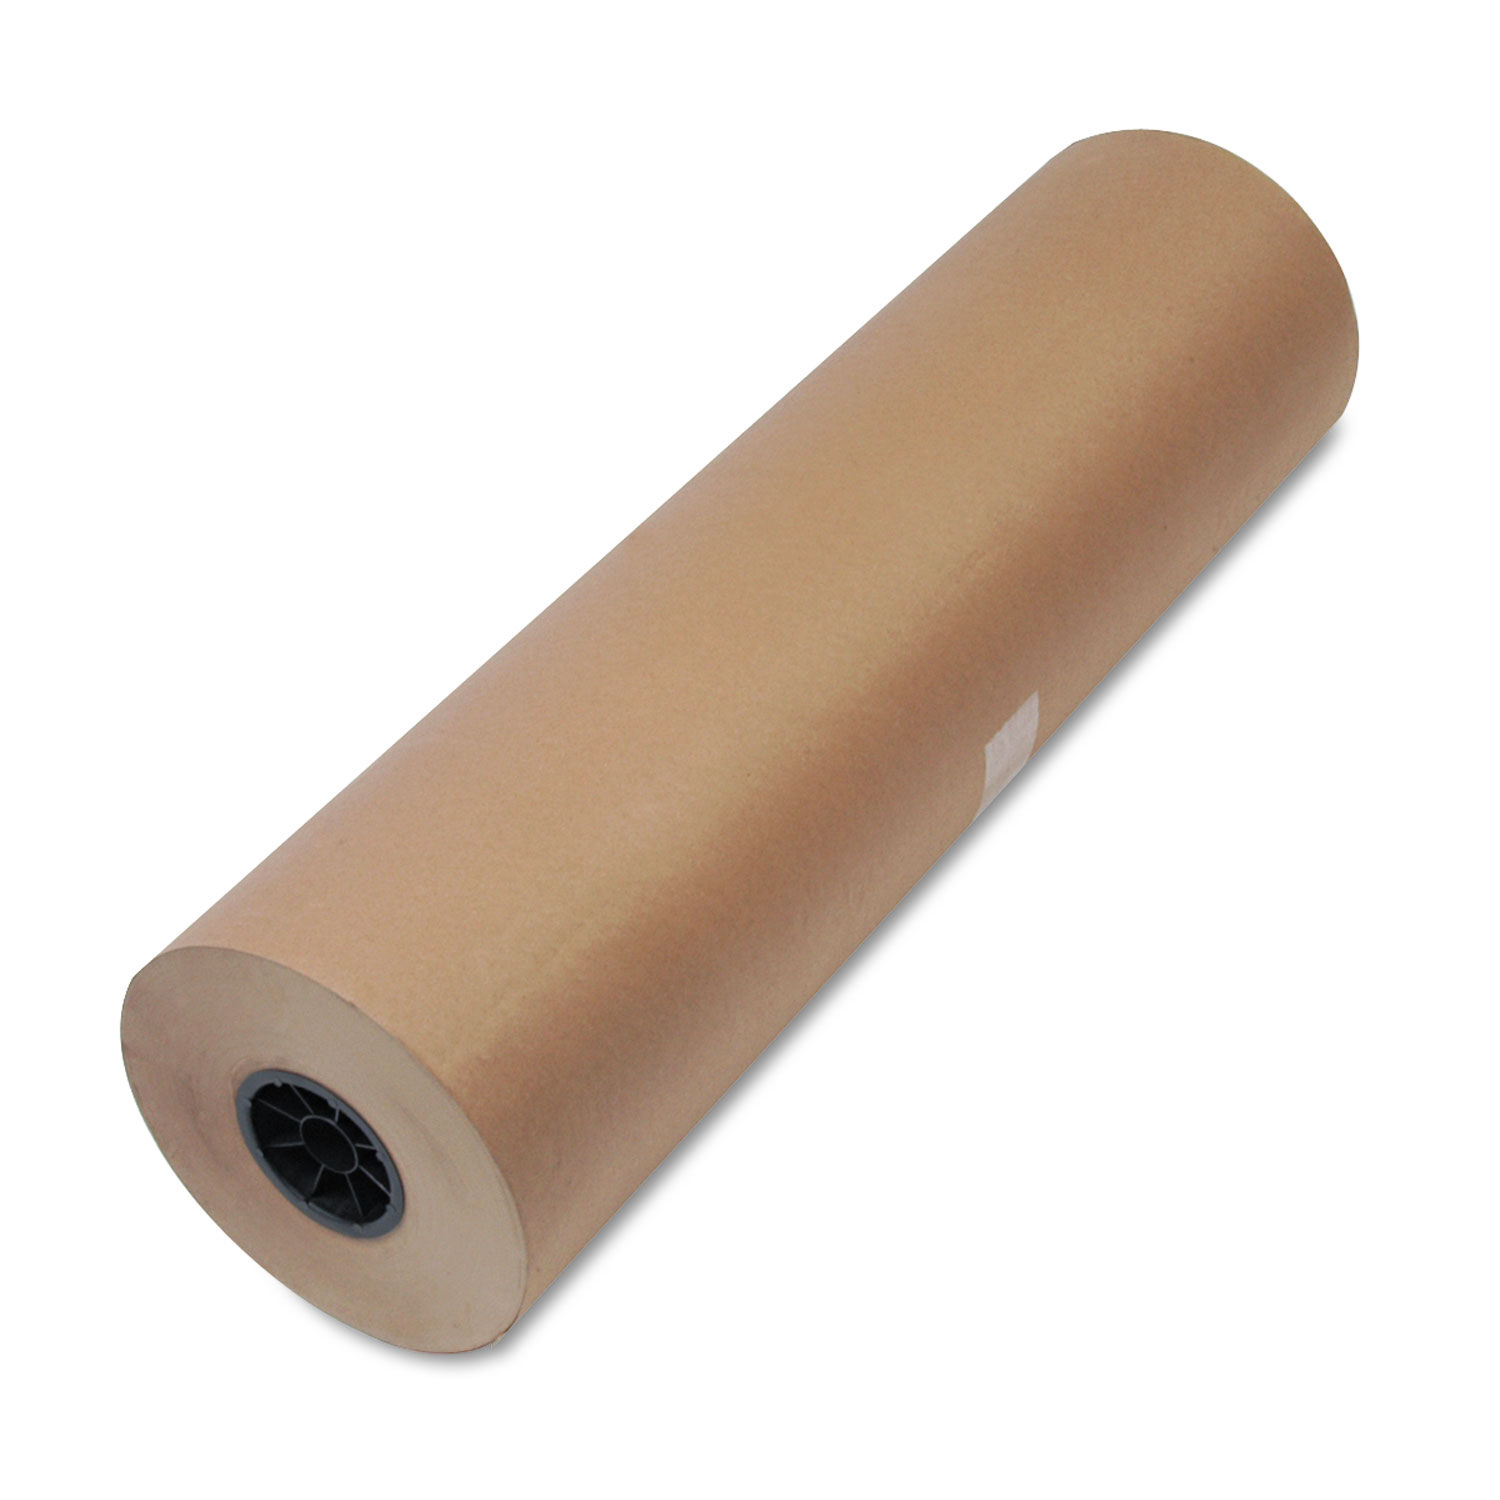 High-Volume Heavyweight Wrapping Paper Roll by Universalandreg; UNV1300046